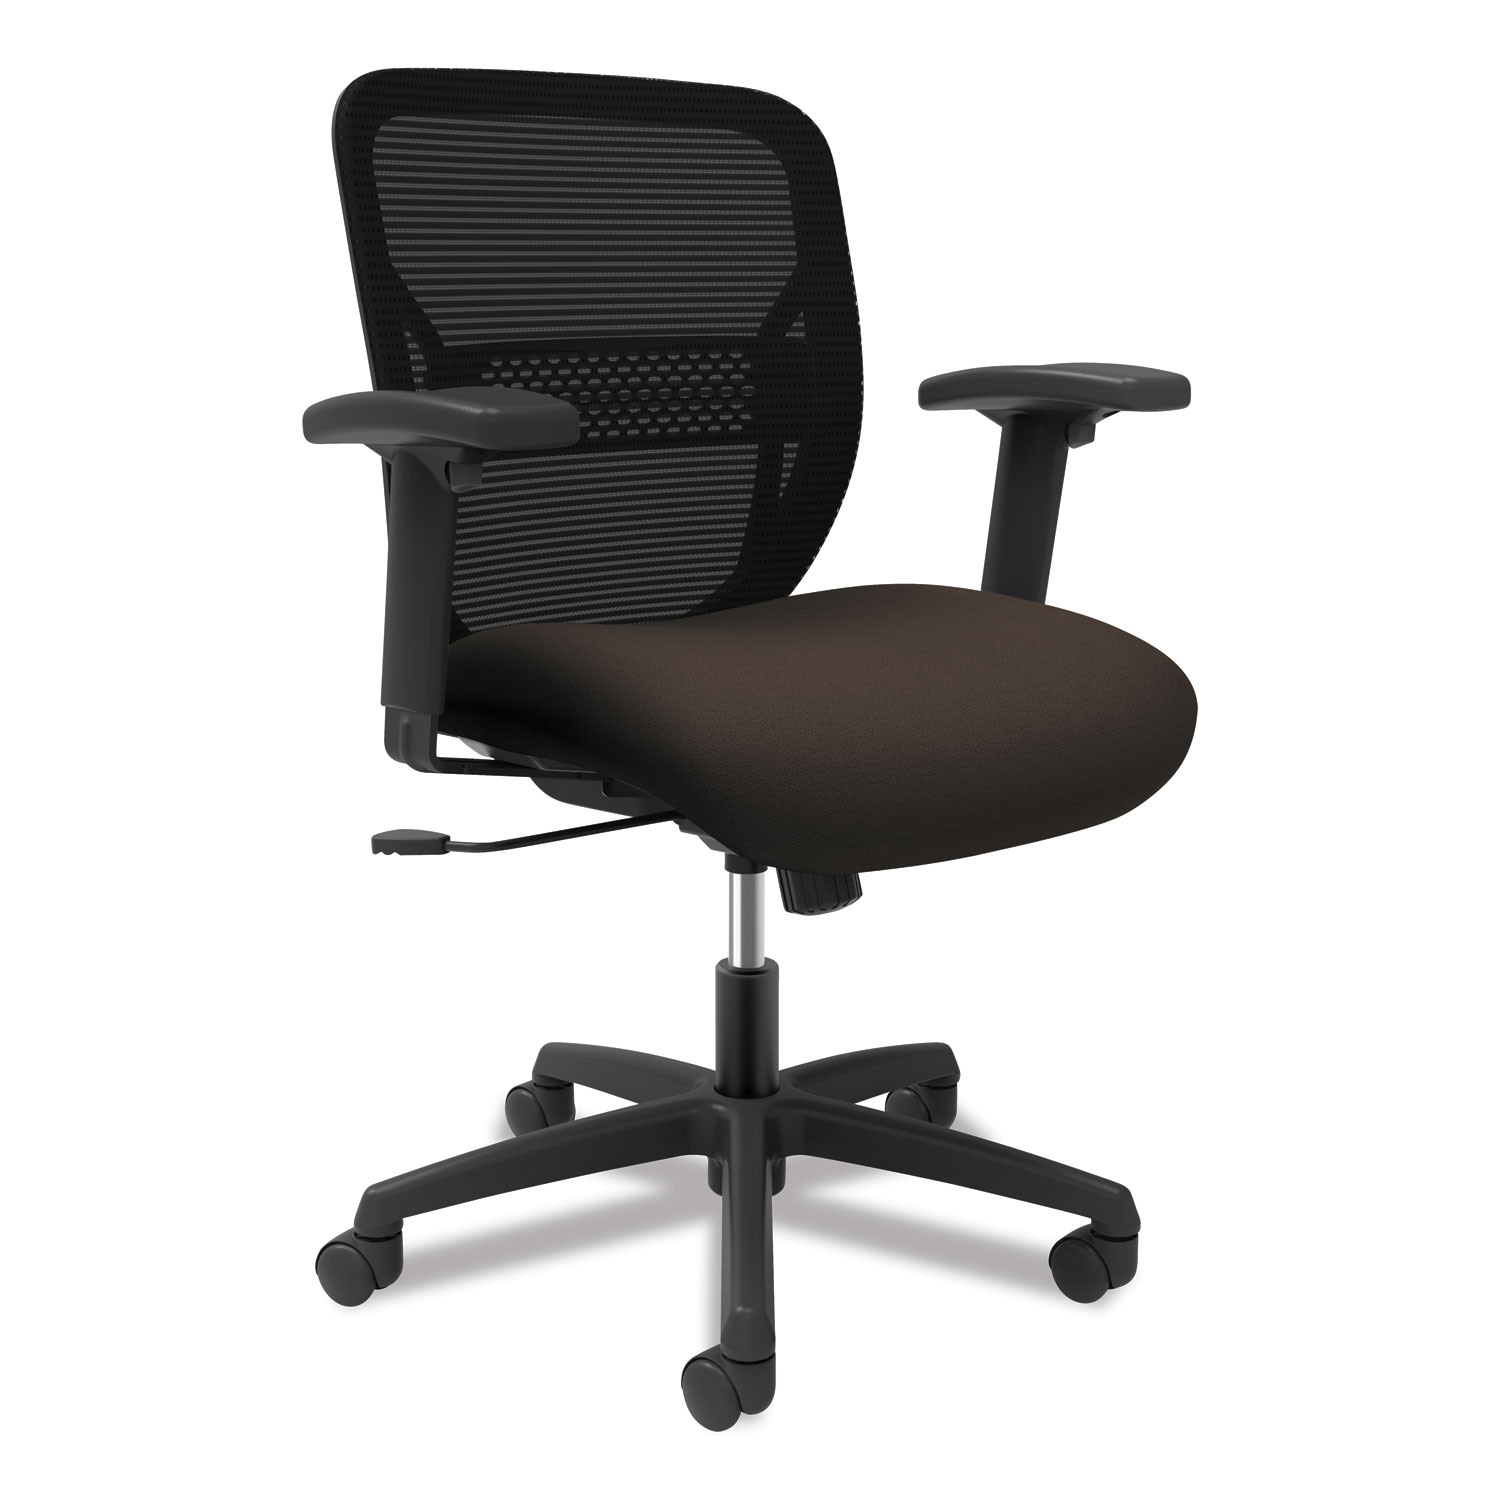  HON HONGTHMZ1CU49 Gateway Mid-Back Task Chair with Adjustable Arms, Supports Up to 250 lbs, Espresso Seat, Black Back, Black Base (HONGTHMZ1CU49) 